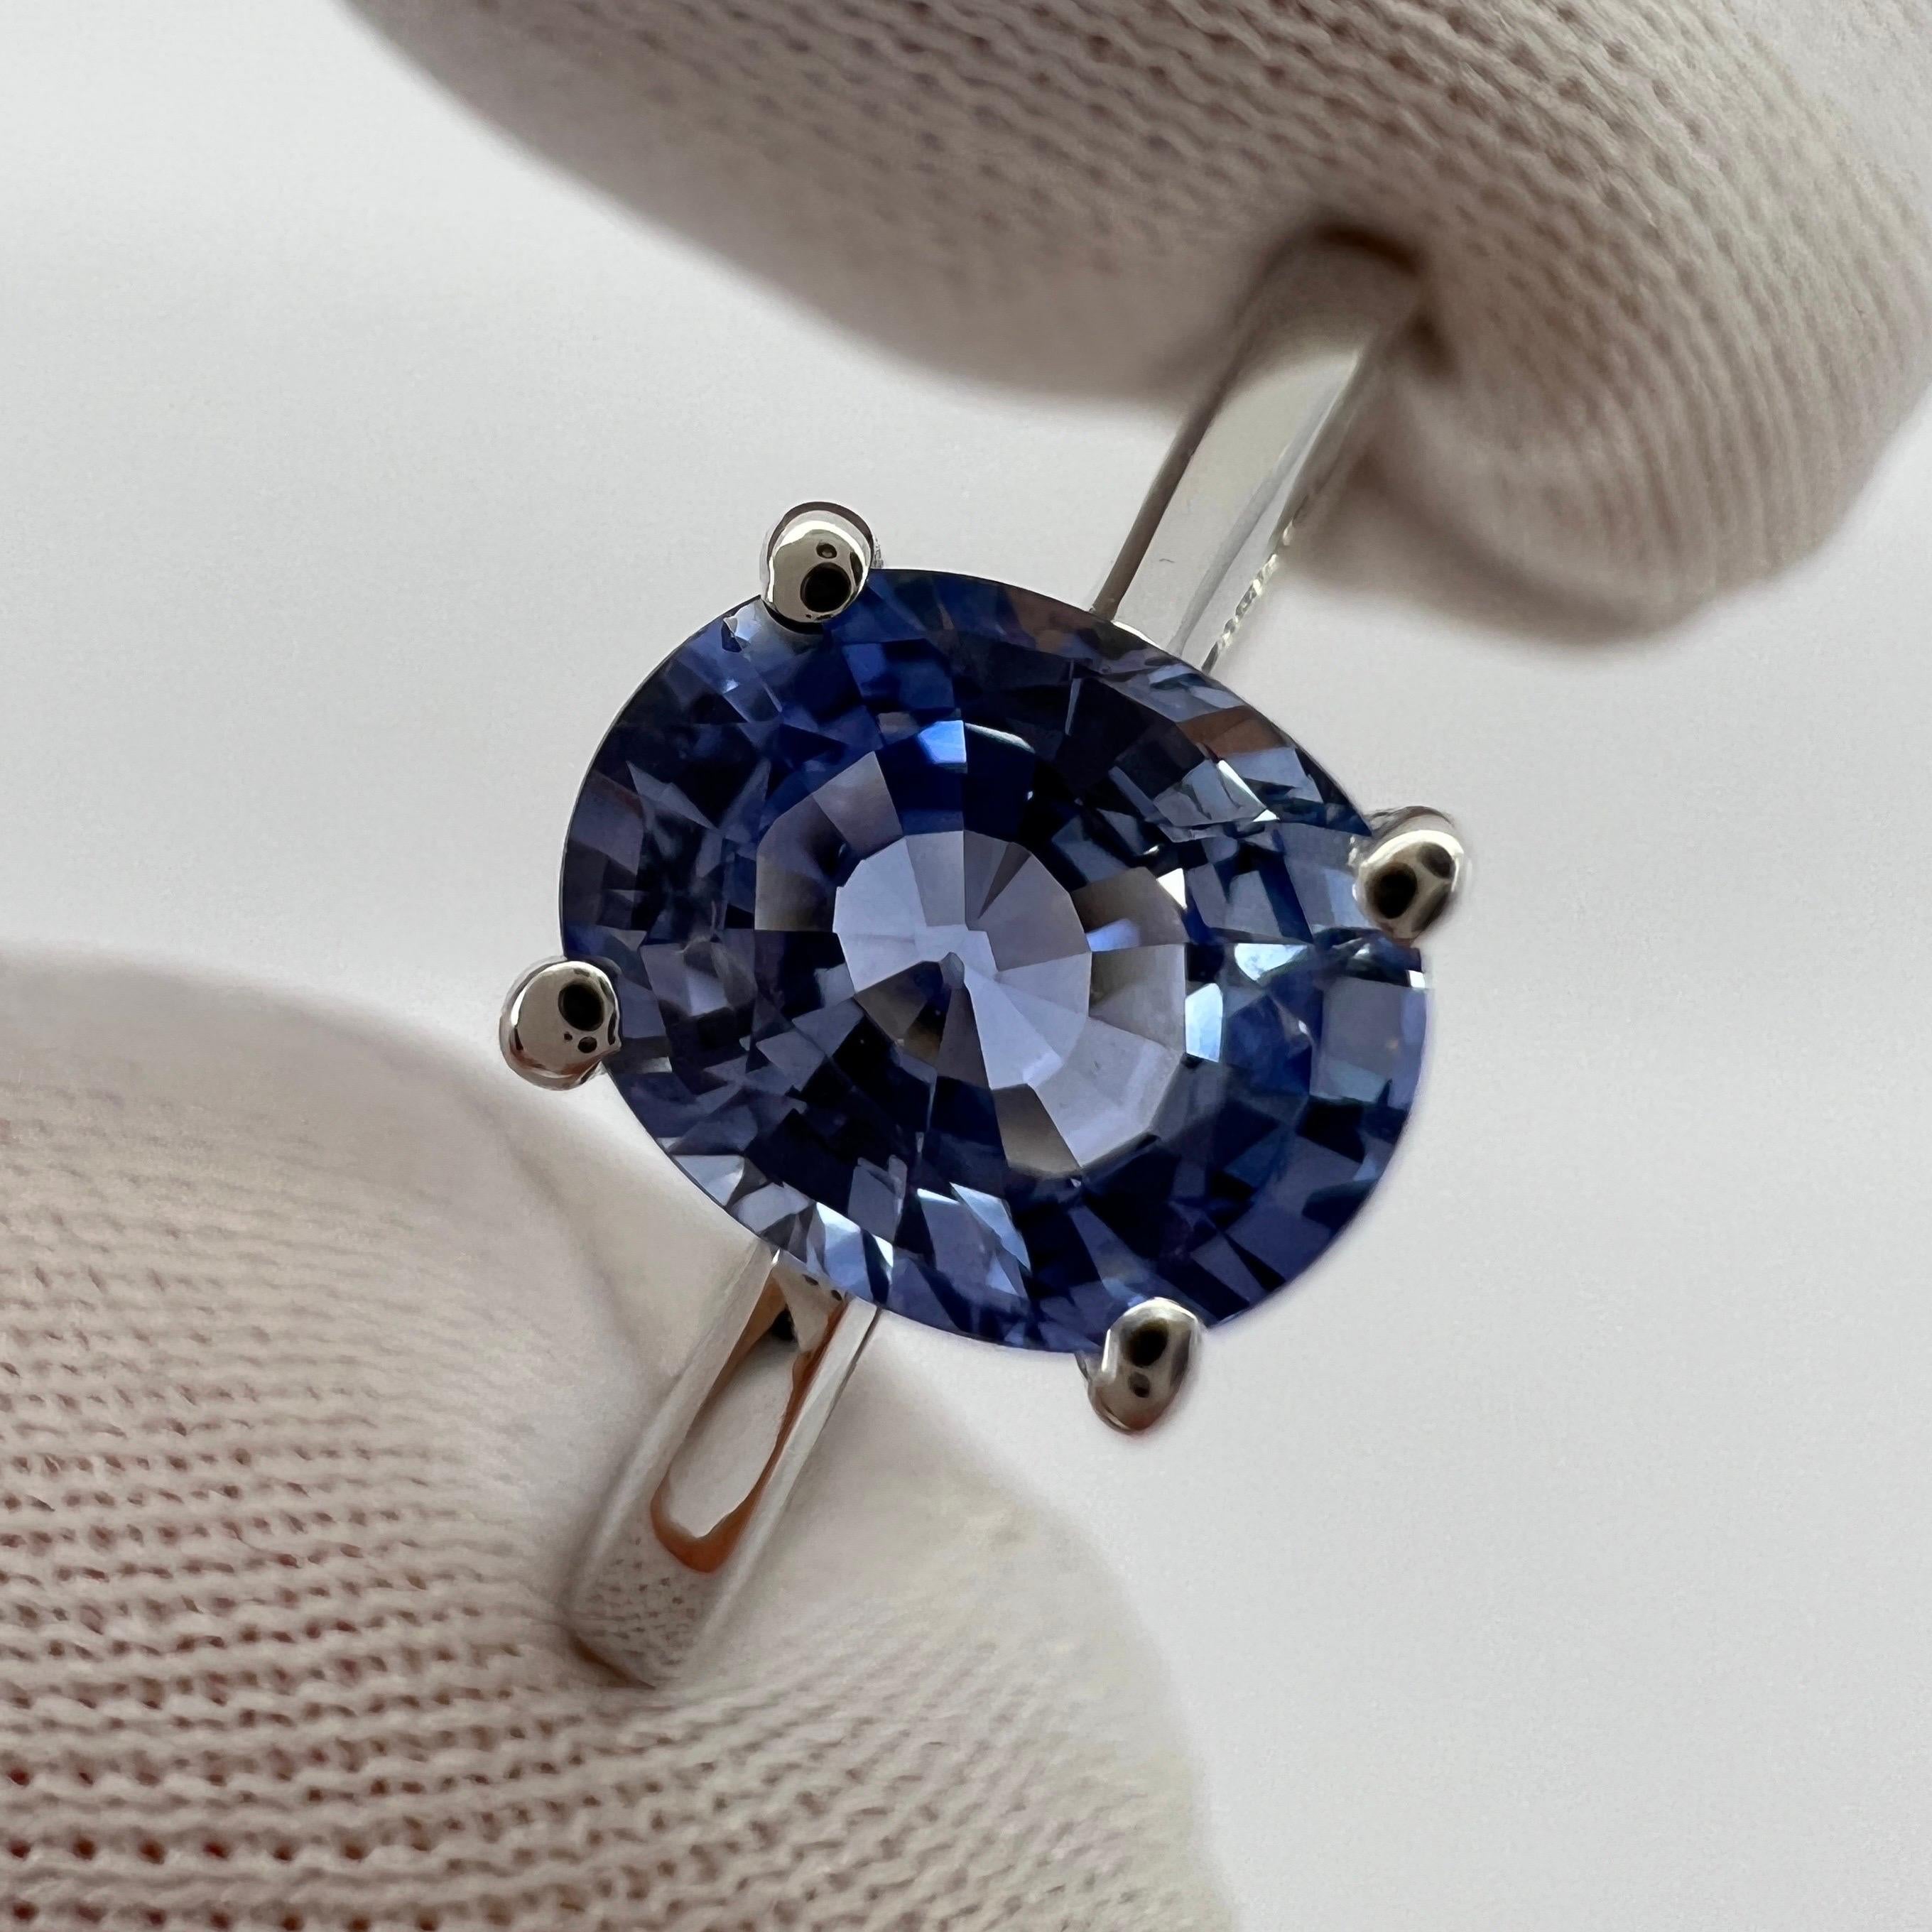 Vivid Light Blue Ceylon Sapphire Oval Cut 18k White Gold Solitaire Ring.

1.20 Carat sapphire with a stunning vivid light blue colour and excellent clarity. Very clean stone.

Also has an excellent oval cut which shows lots of sparkle and light